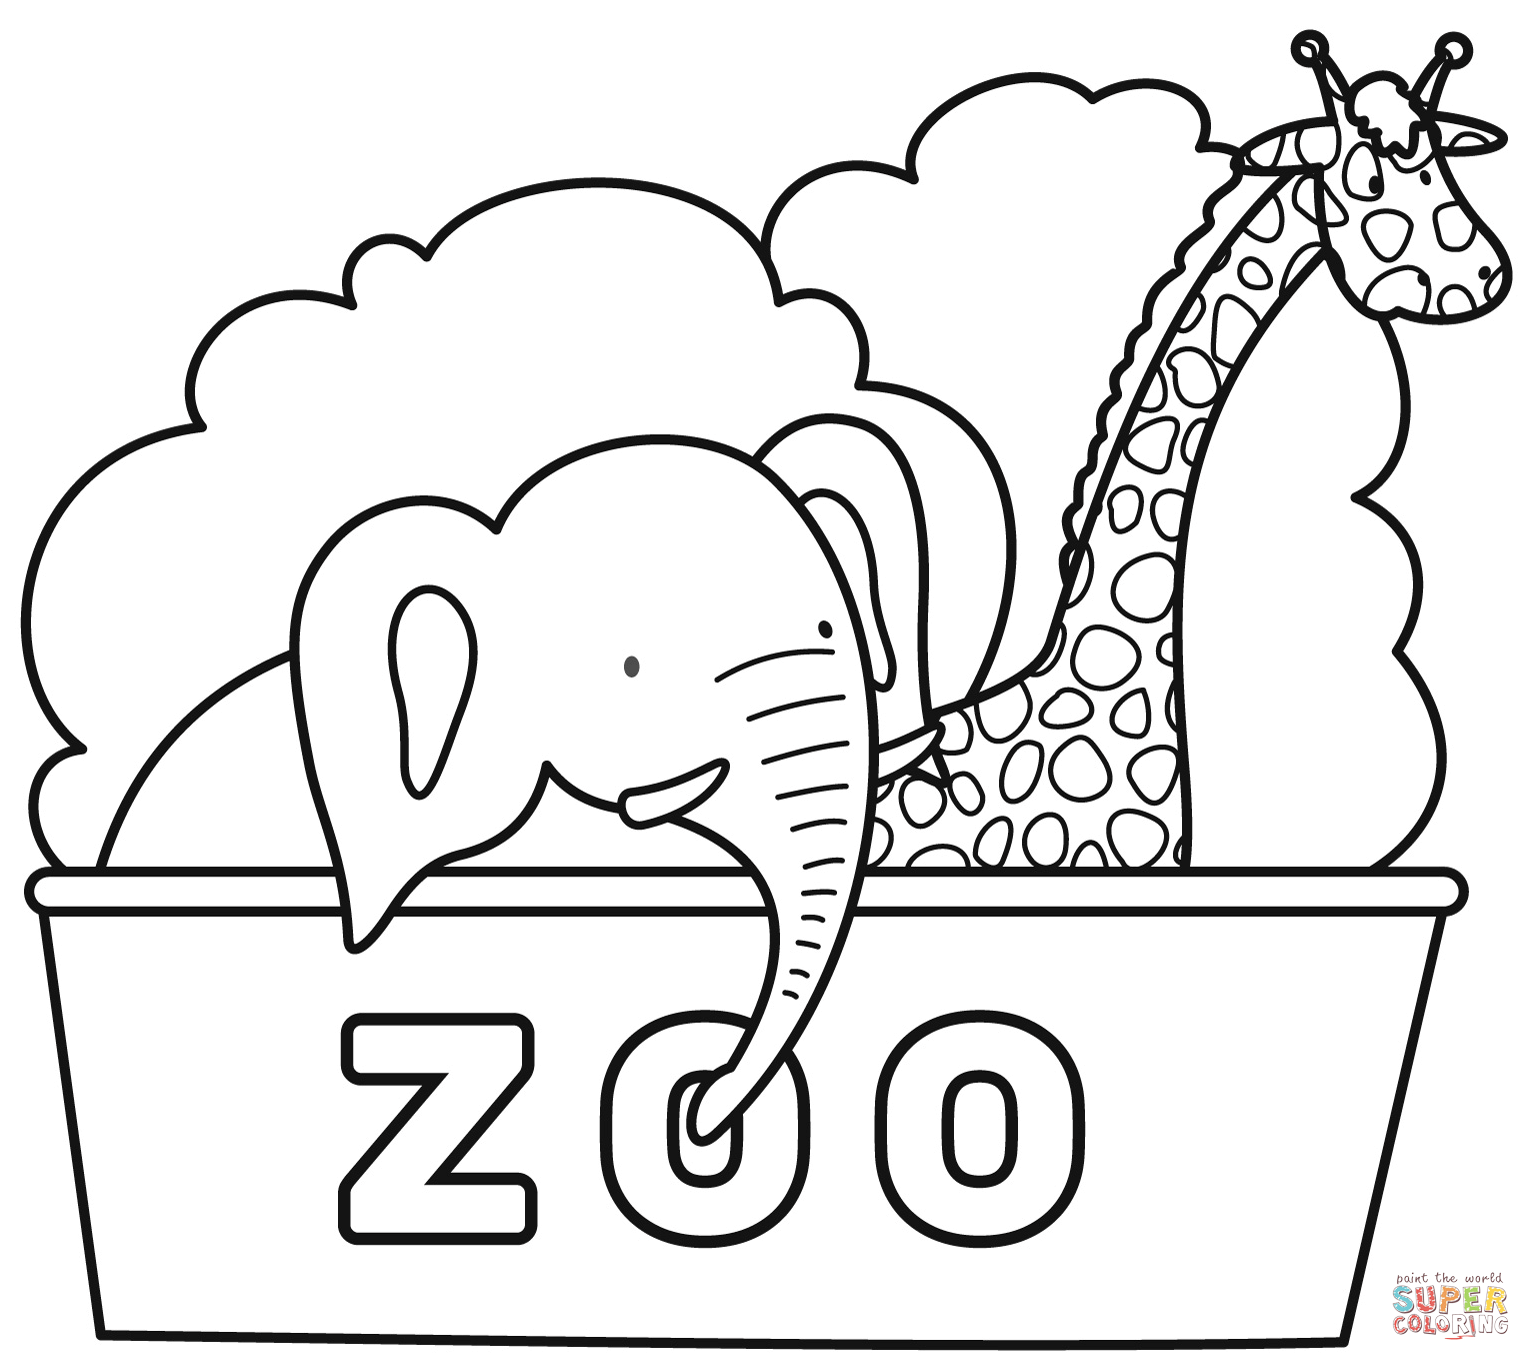 Zoo coloring page free printable coloring pages